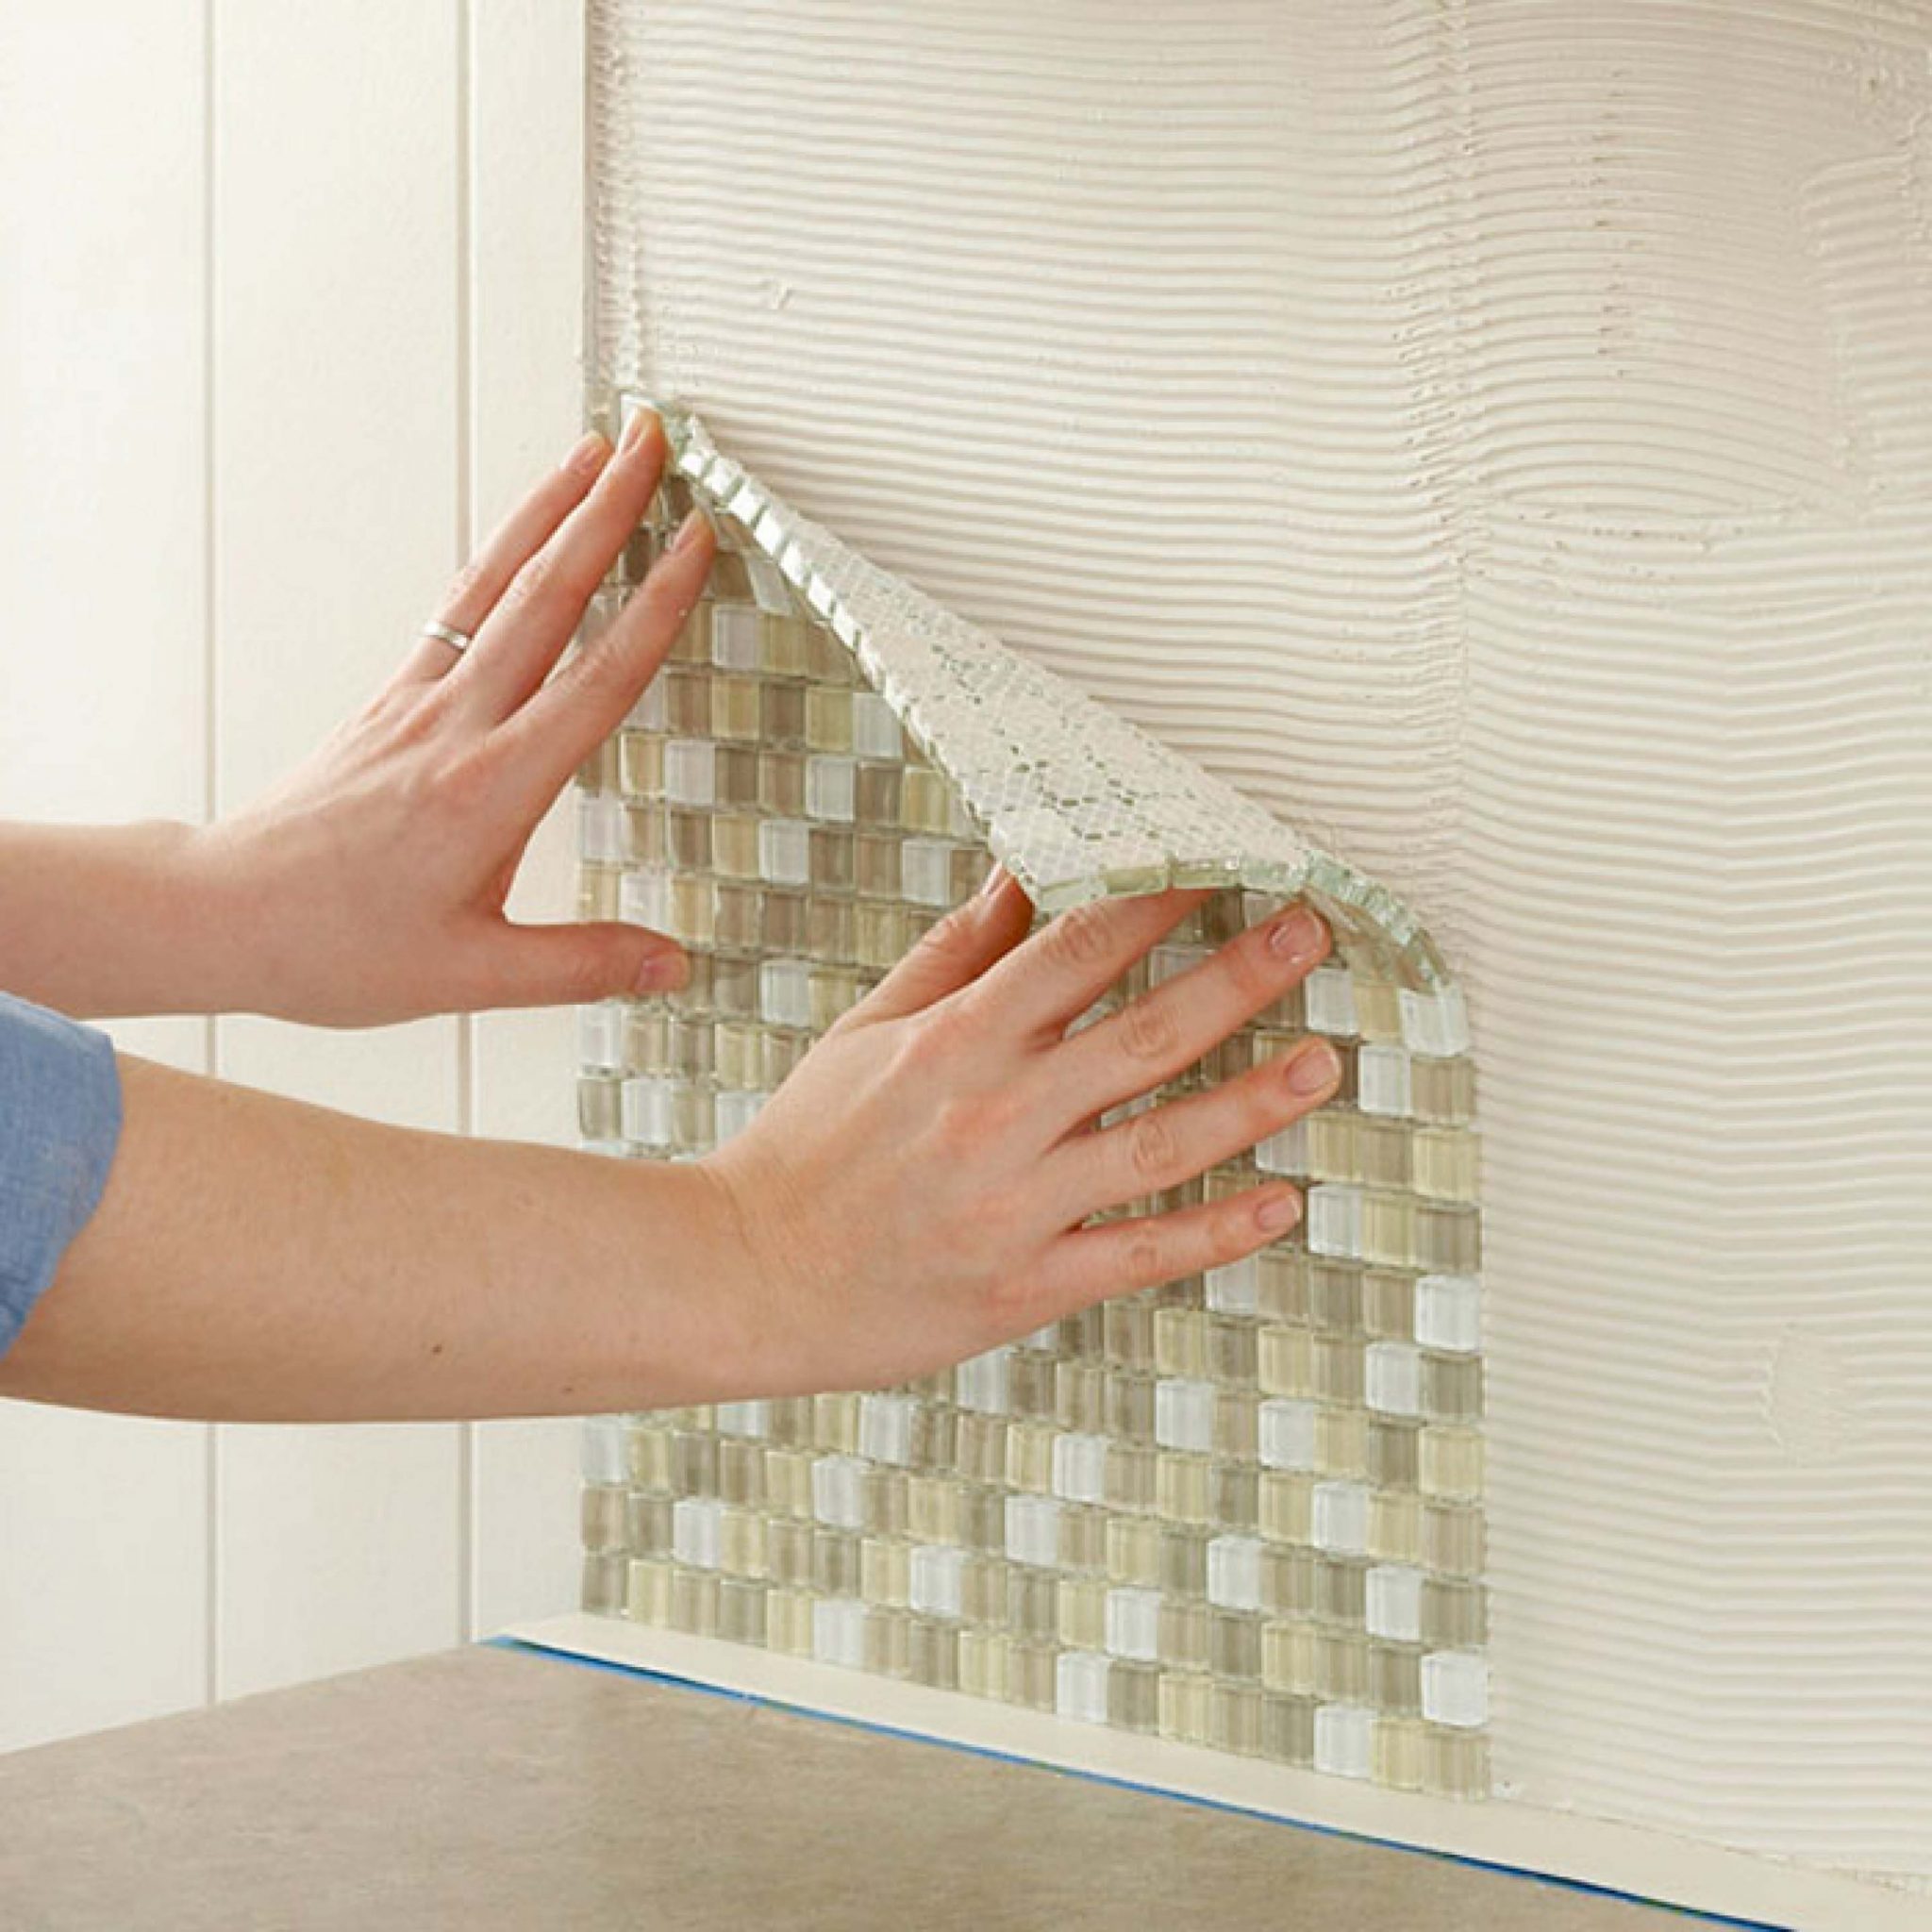 Fixing mosaic tile sheets to a wall.